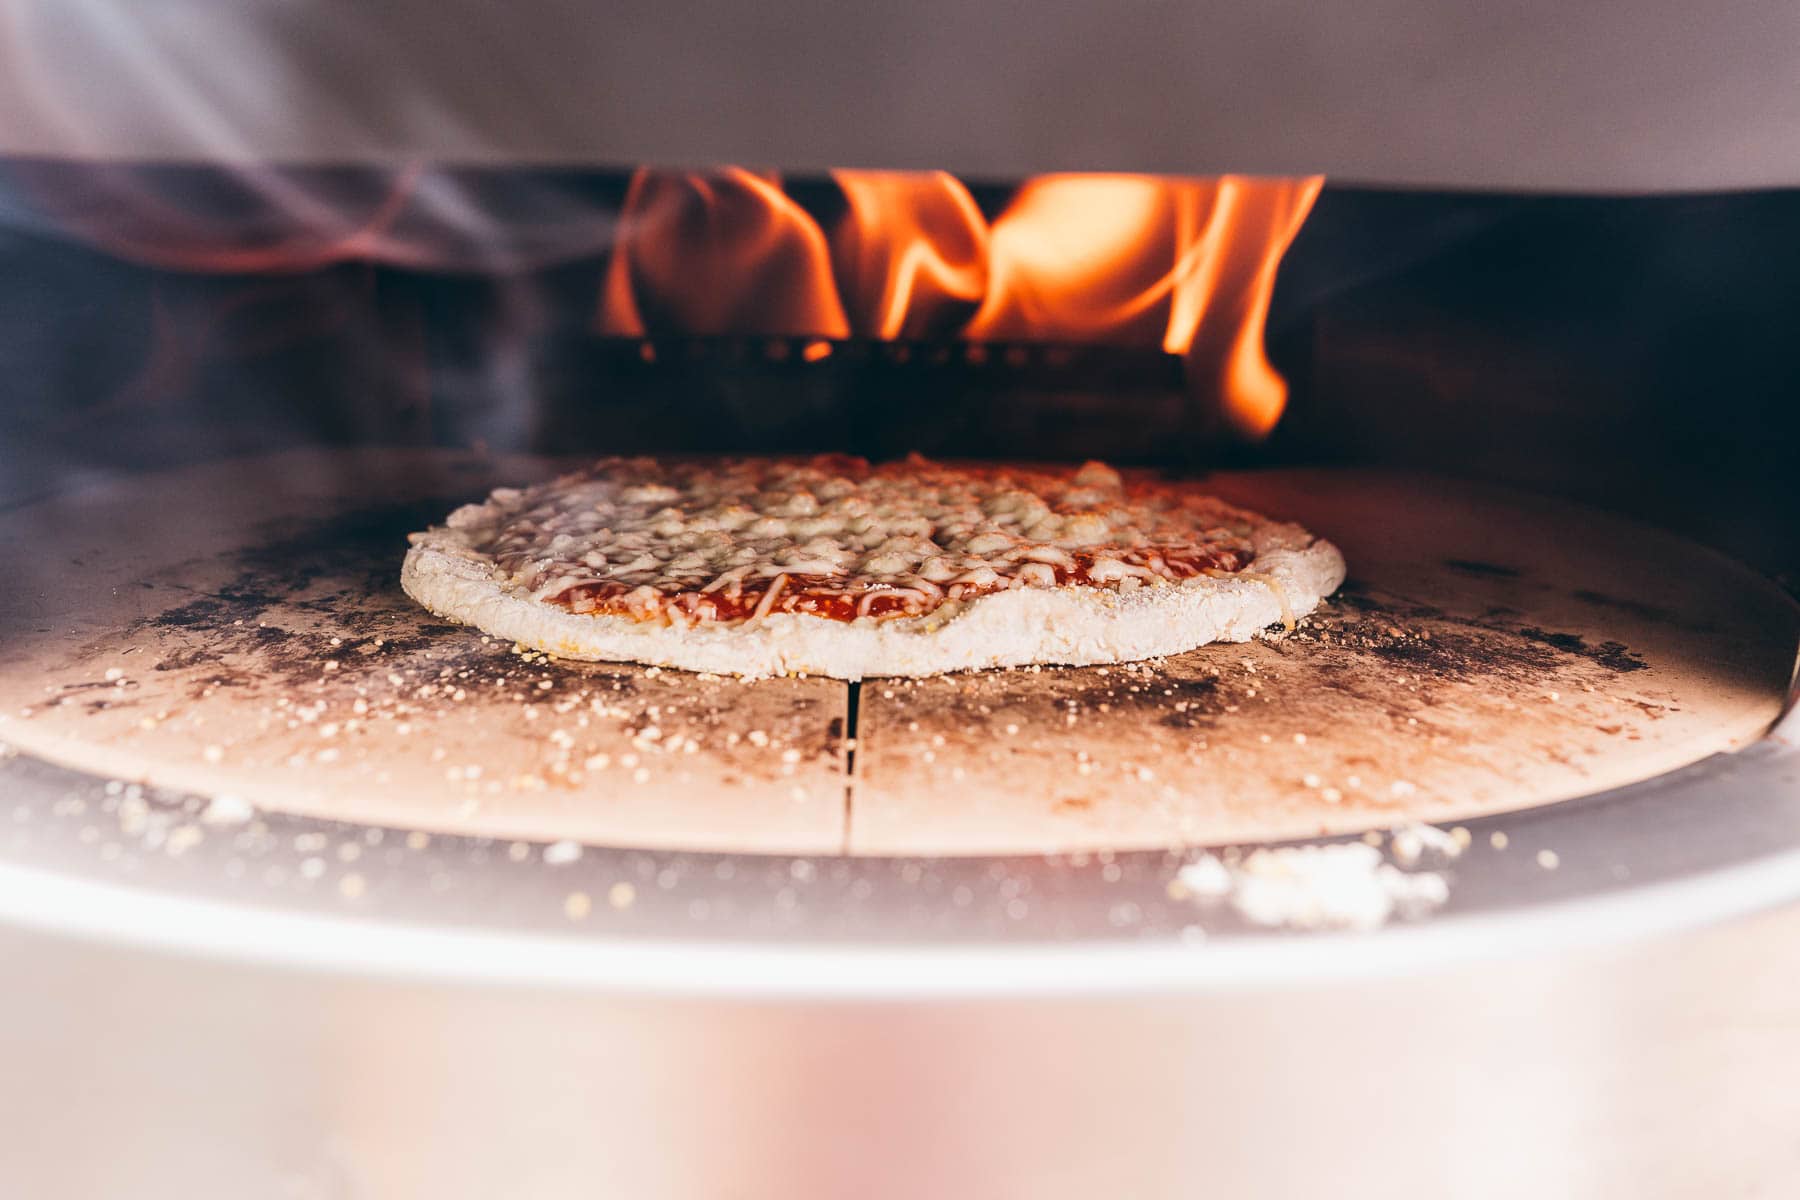 A pizza is being cooked in a solo stove pizza oven.